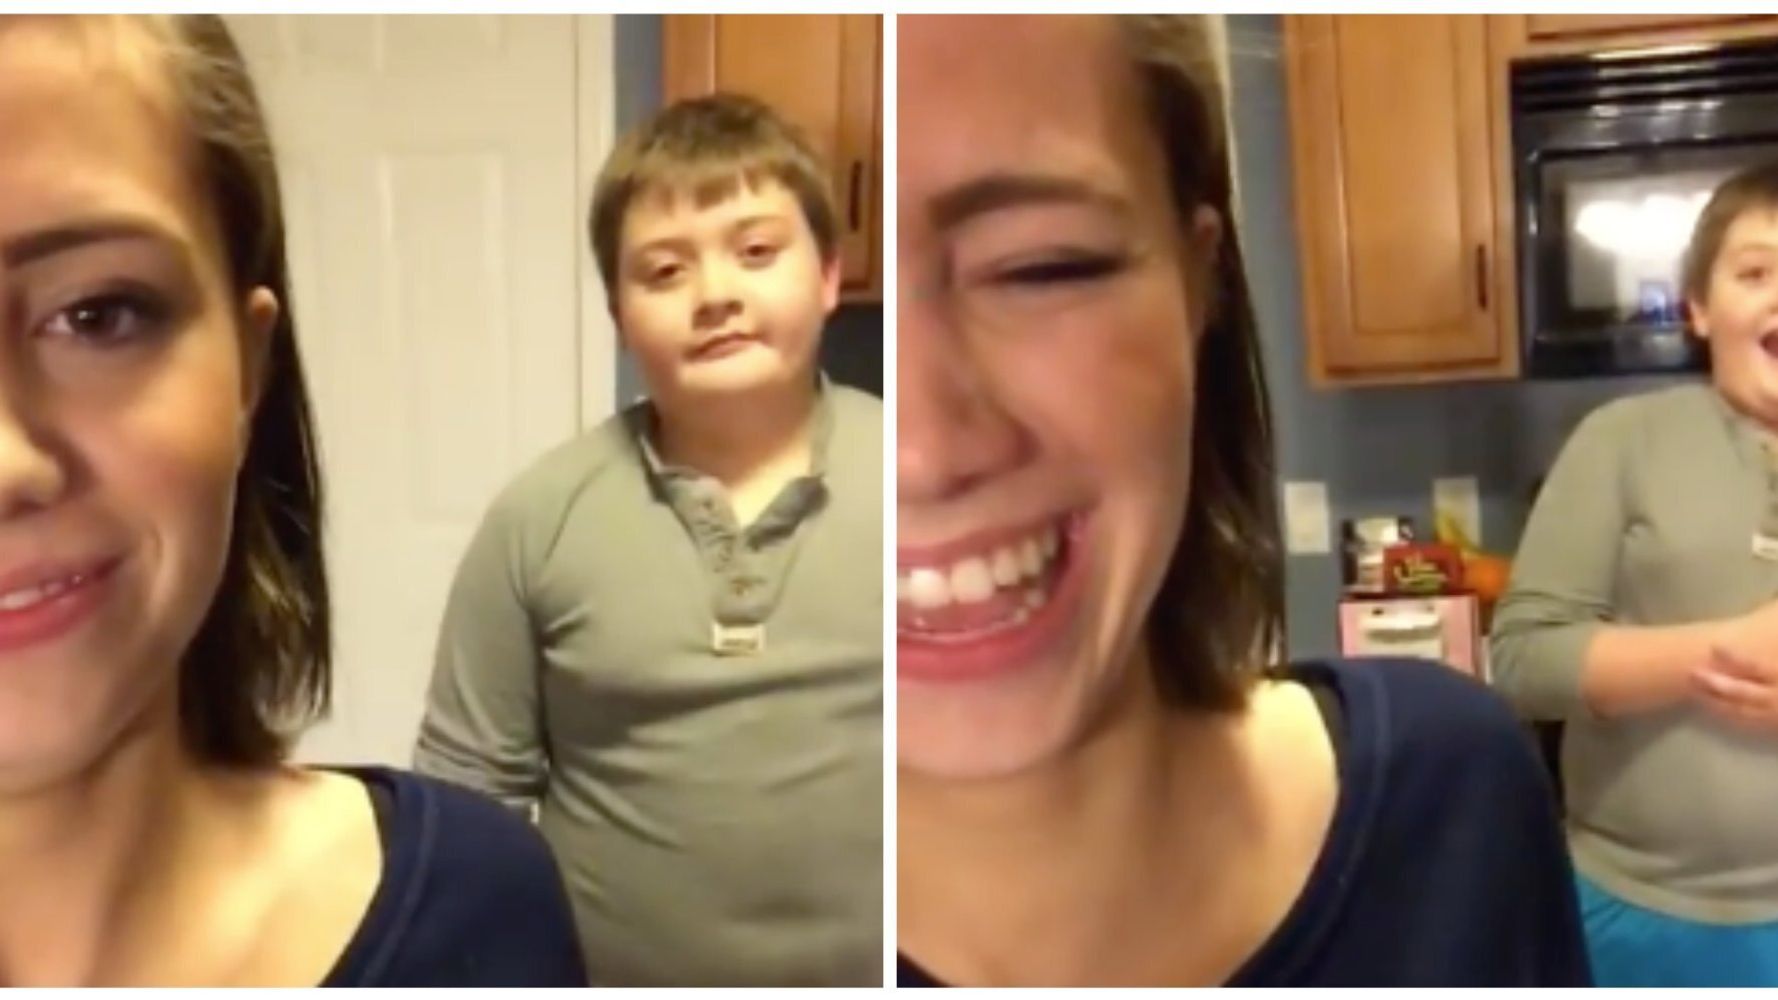 Sister Shocks Younger Brother In A Rather Unsettling Way.